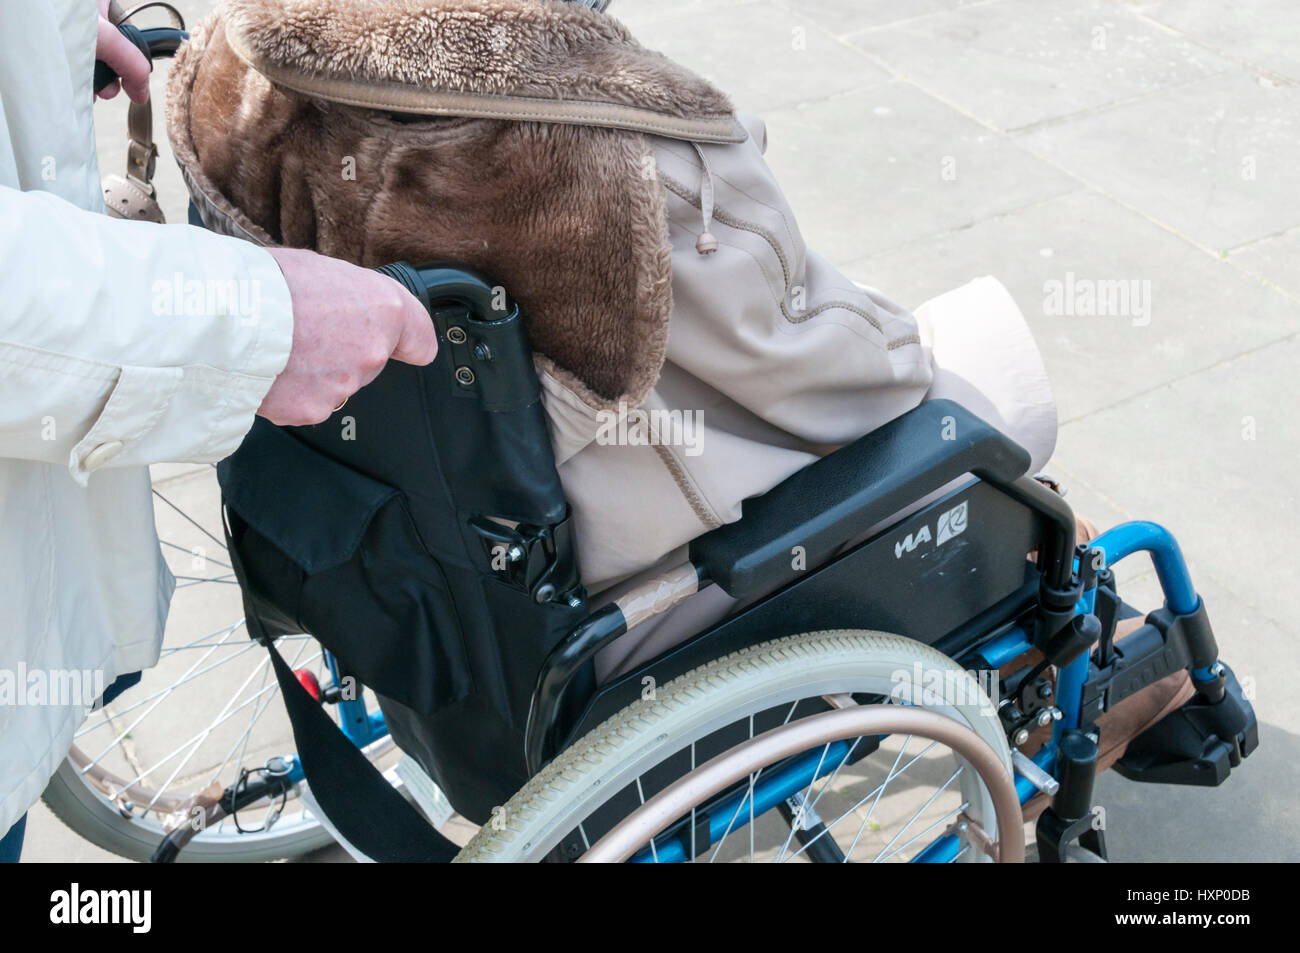 Wheelchair User And Uk Stock Photos & Wheelchair User And Uk Stock